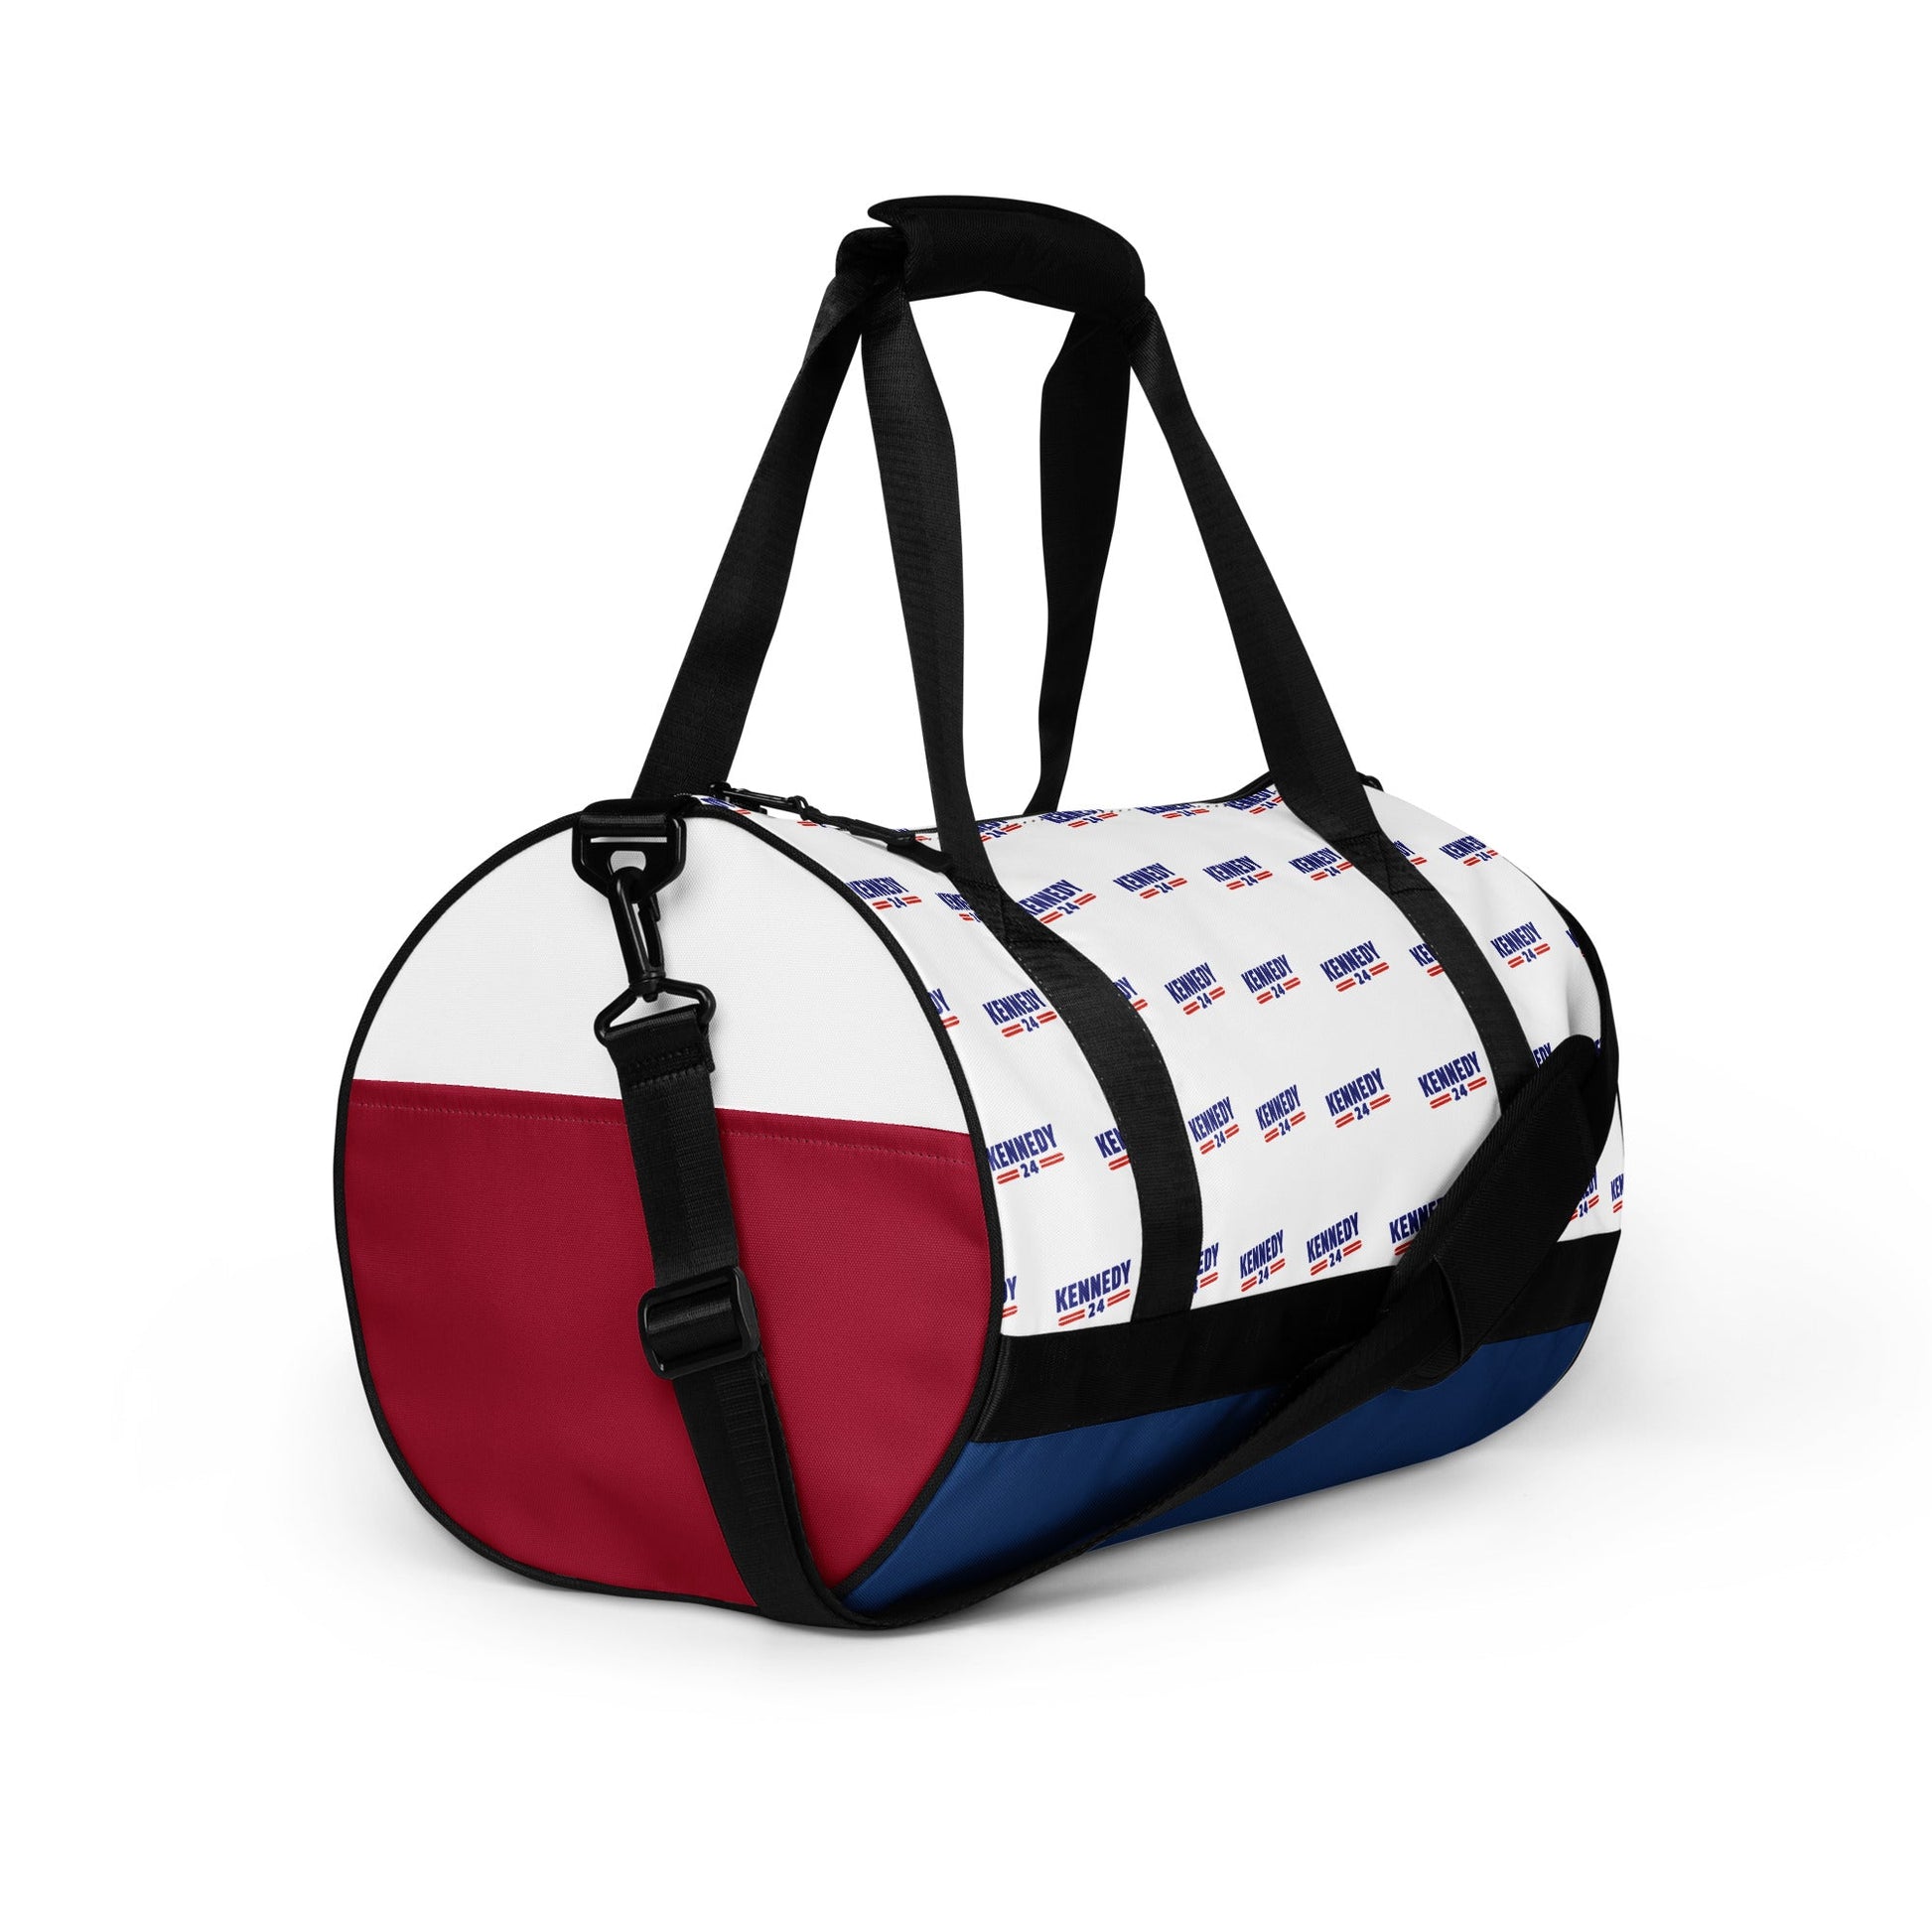 Kennedy Classic Gym Bag - TEAM KENNEDY. All rights reserved